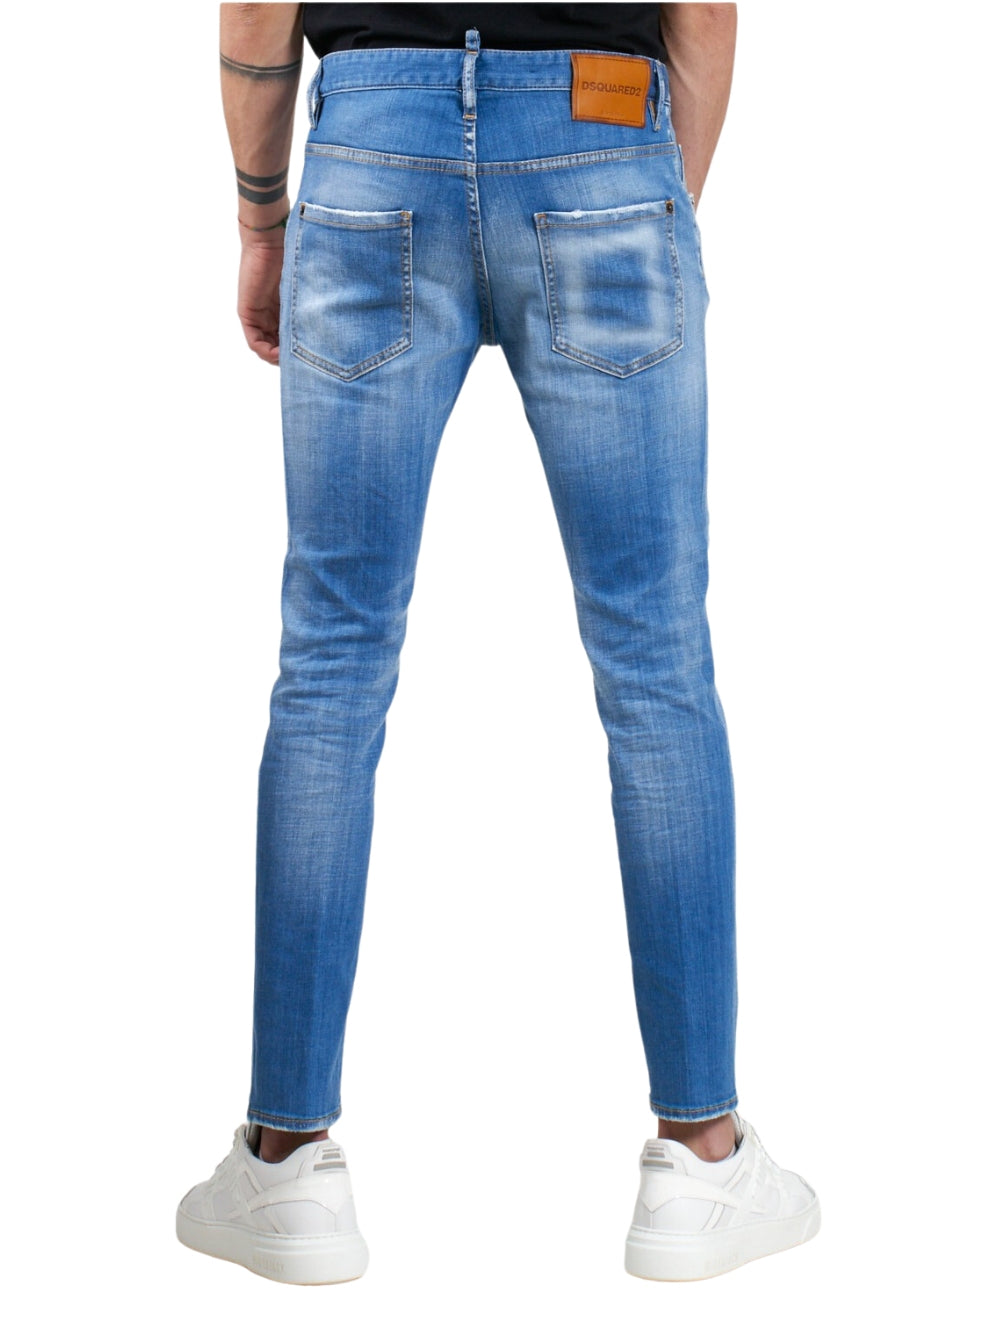 Dsquared2 jeans